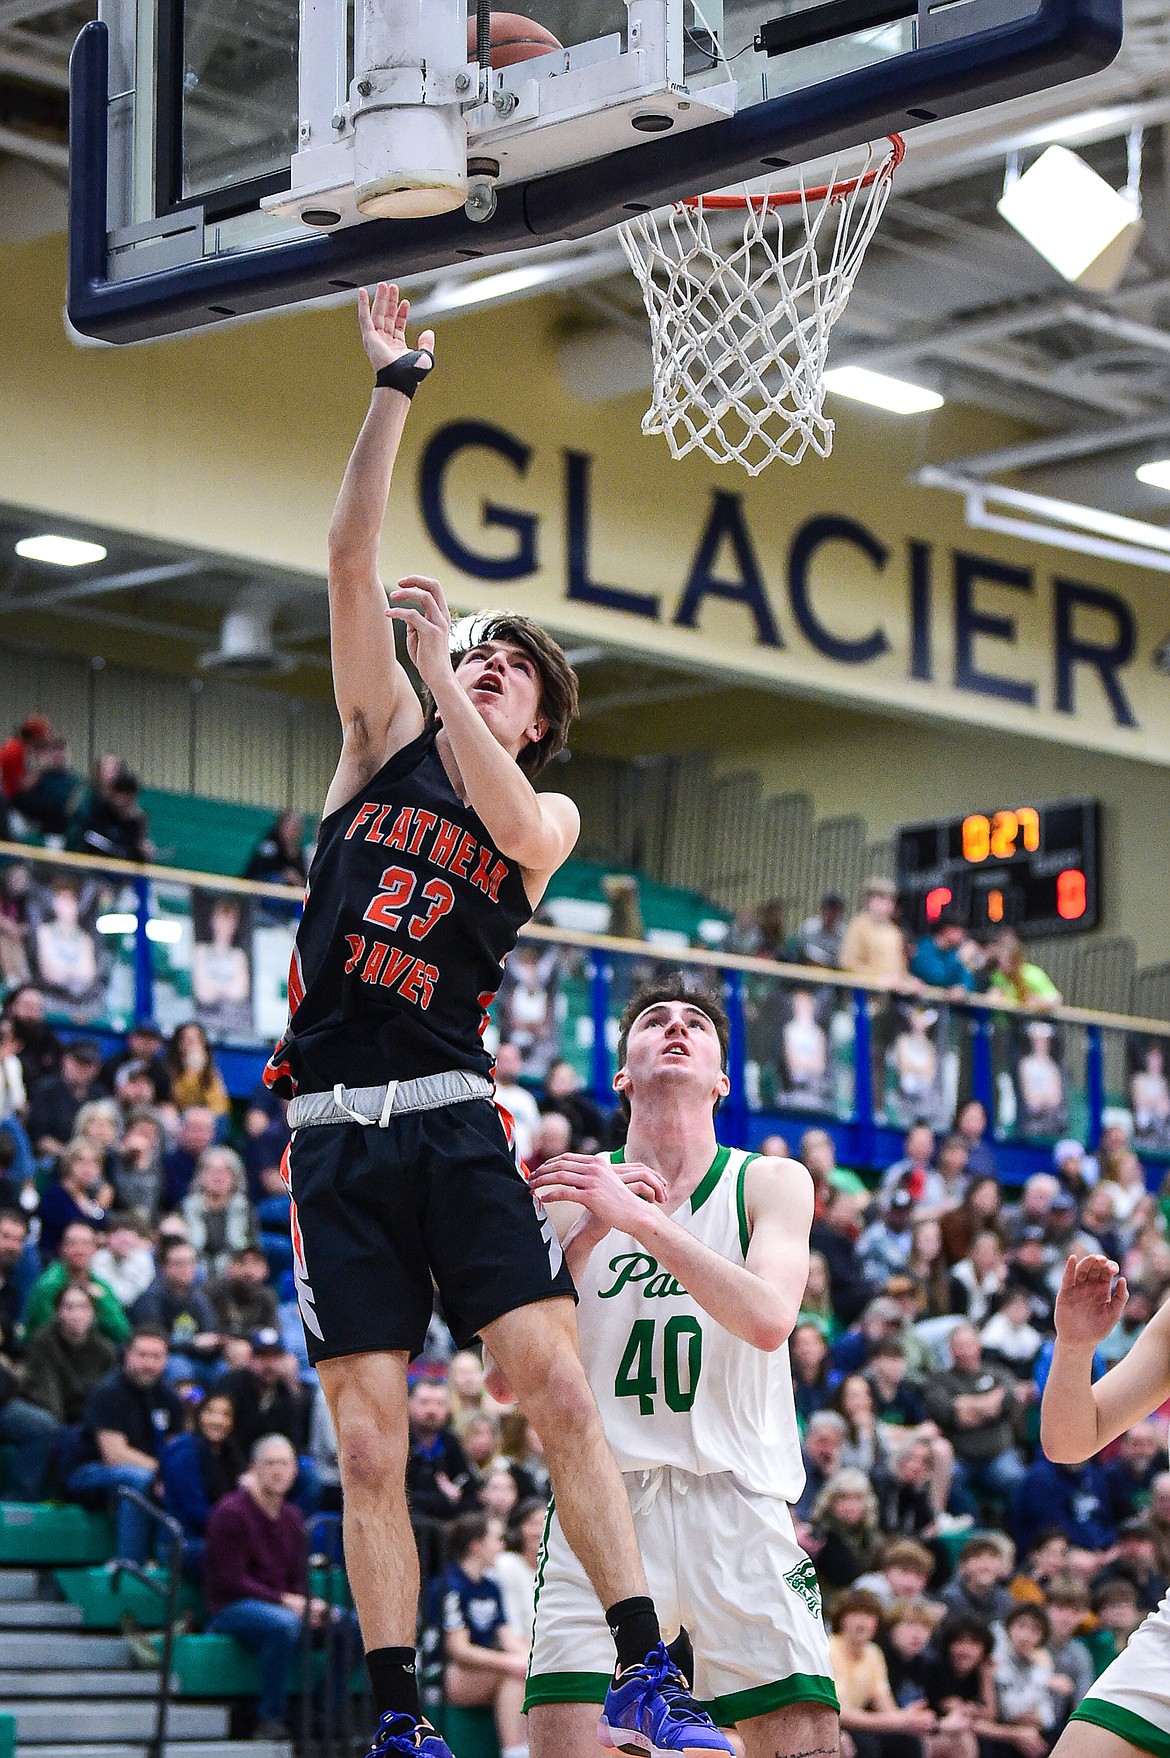 Flathead's Brody Thornsberry (23) drives to the basket in the second half against Glacier at Glacier High School on Thursday, Feb. 1. (Casey Kreider/Daily Inter Lake)